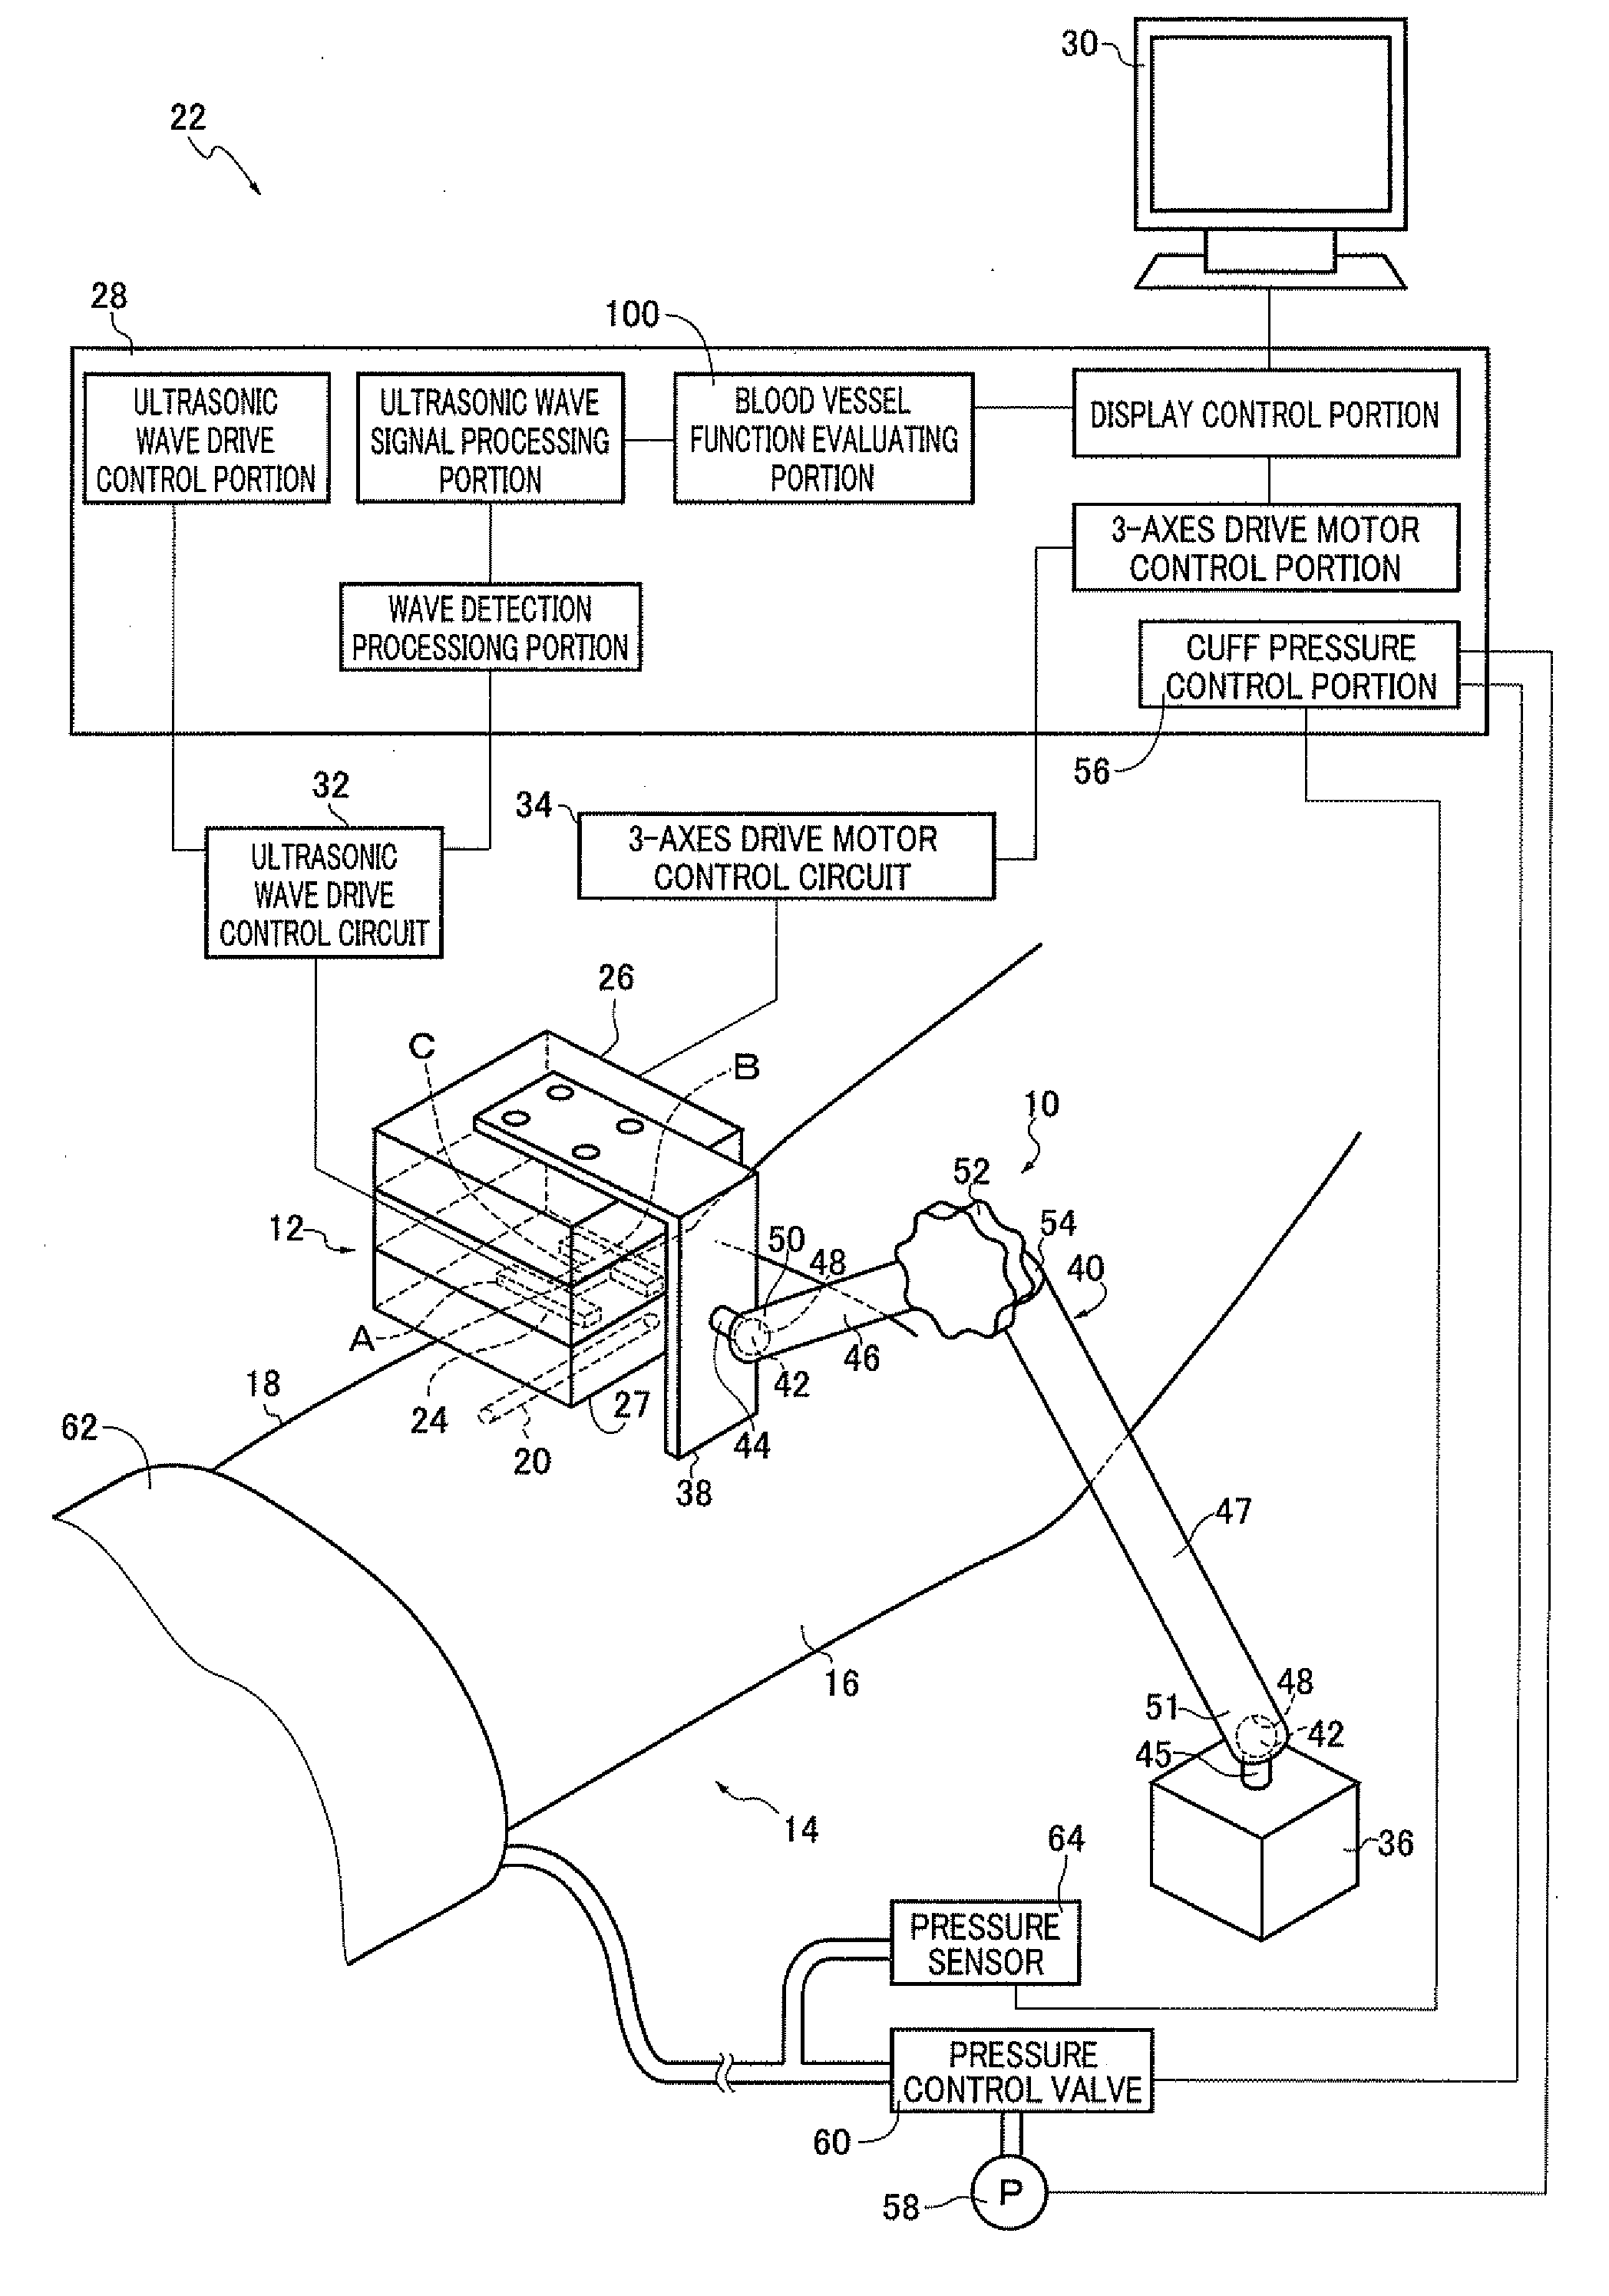 Blood vessel function inspecting apparatus